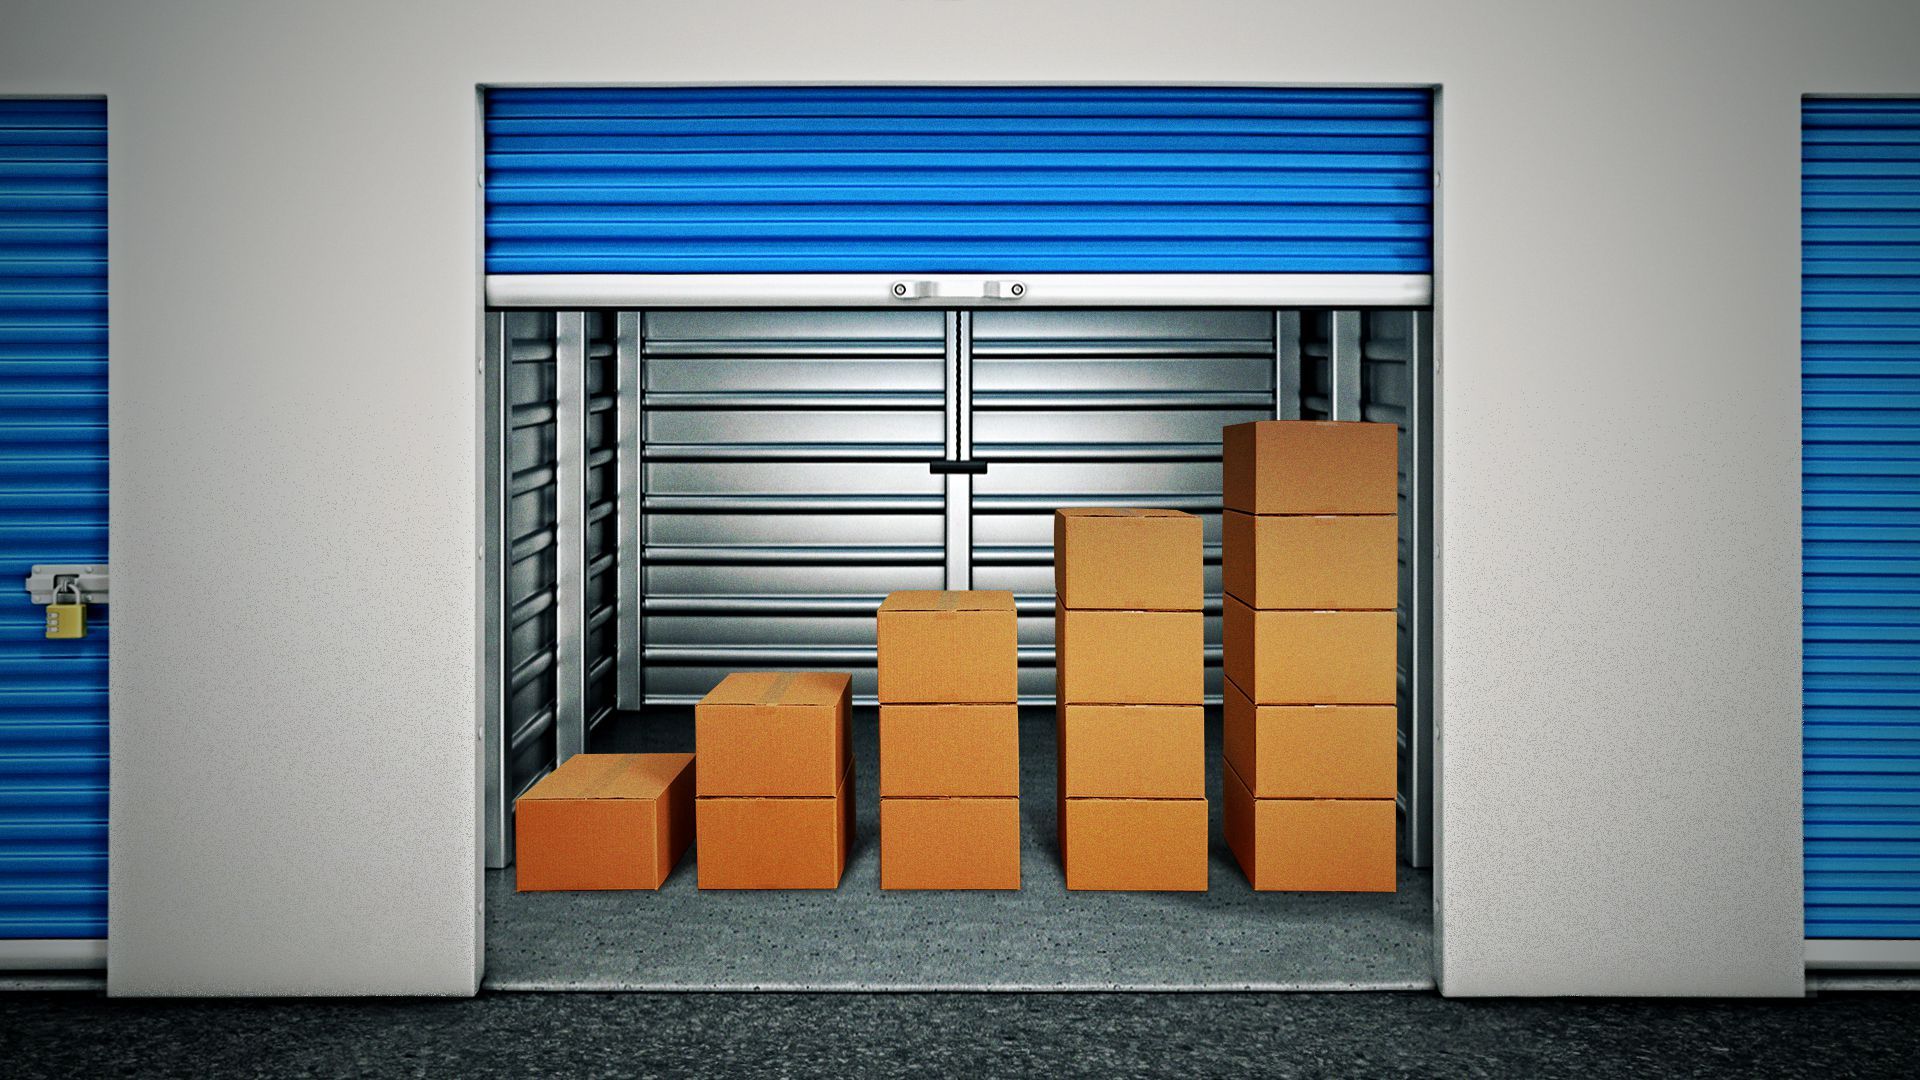 Illustration of a self-storage unit with boxes creating an upwards bar chart.